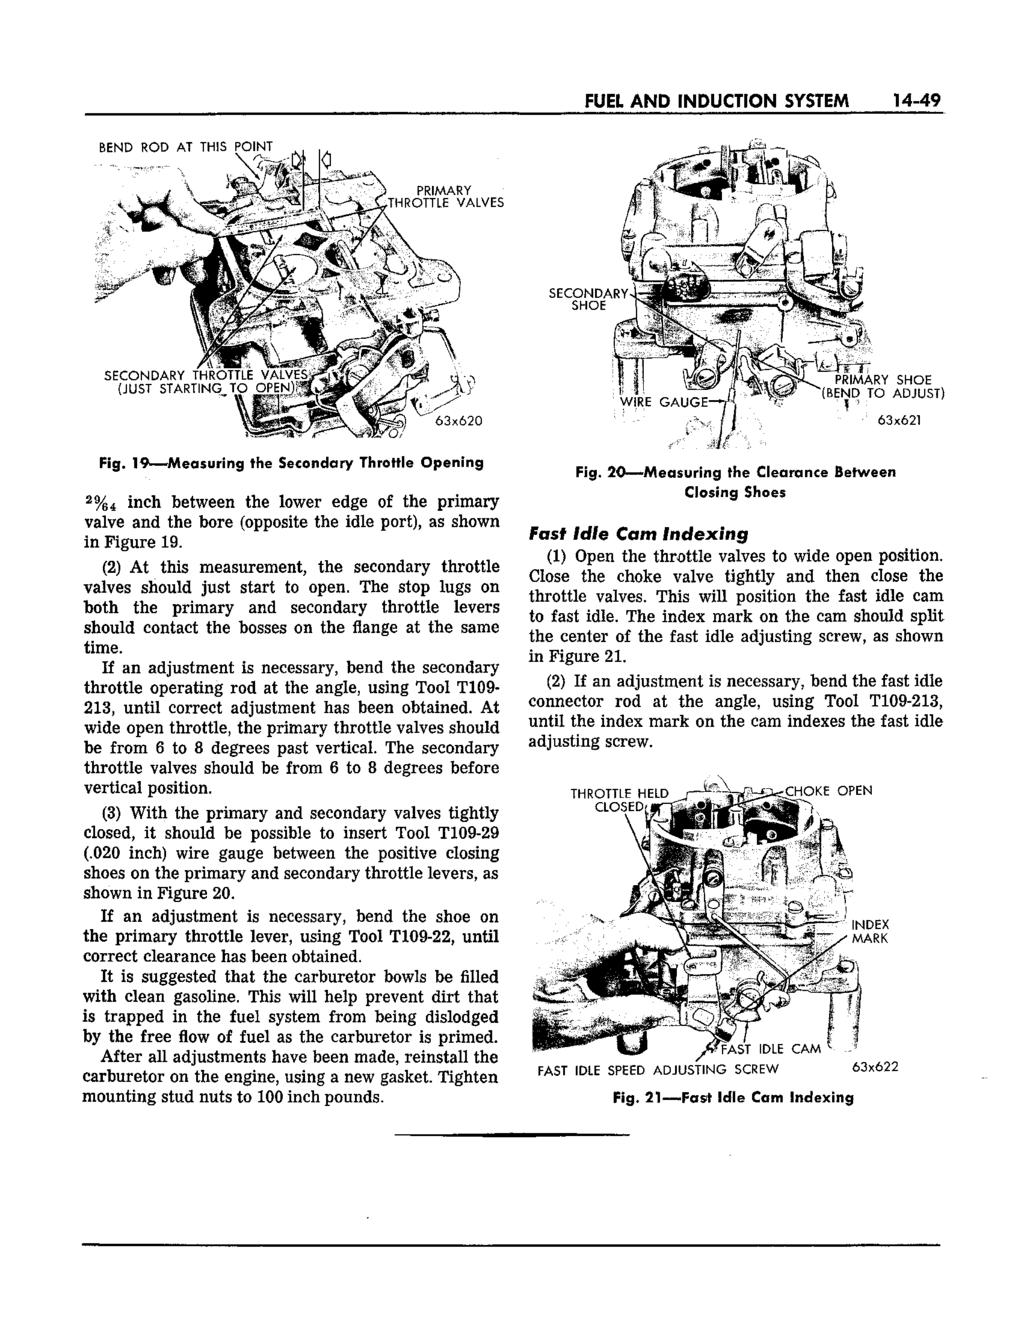 FUEL AND INDUCTION SYSTEM 14-49 Fig. 19 Measuring the Secondary Throttle Opening 2 % 4 inch between the lower edge of the primary valve and the bore (opposite the idle port), as shown in Figure 19.